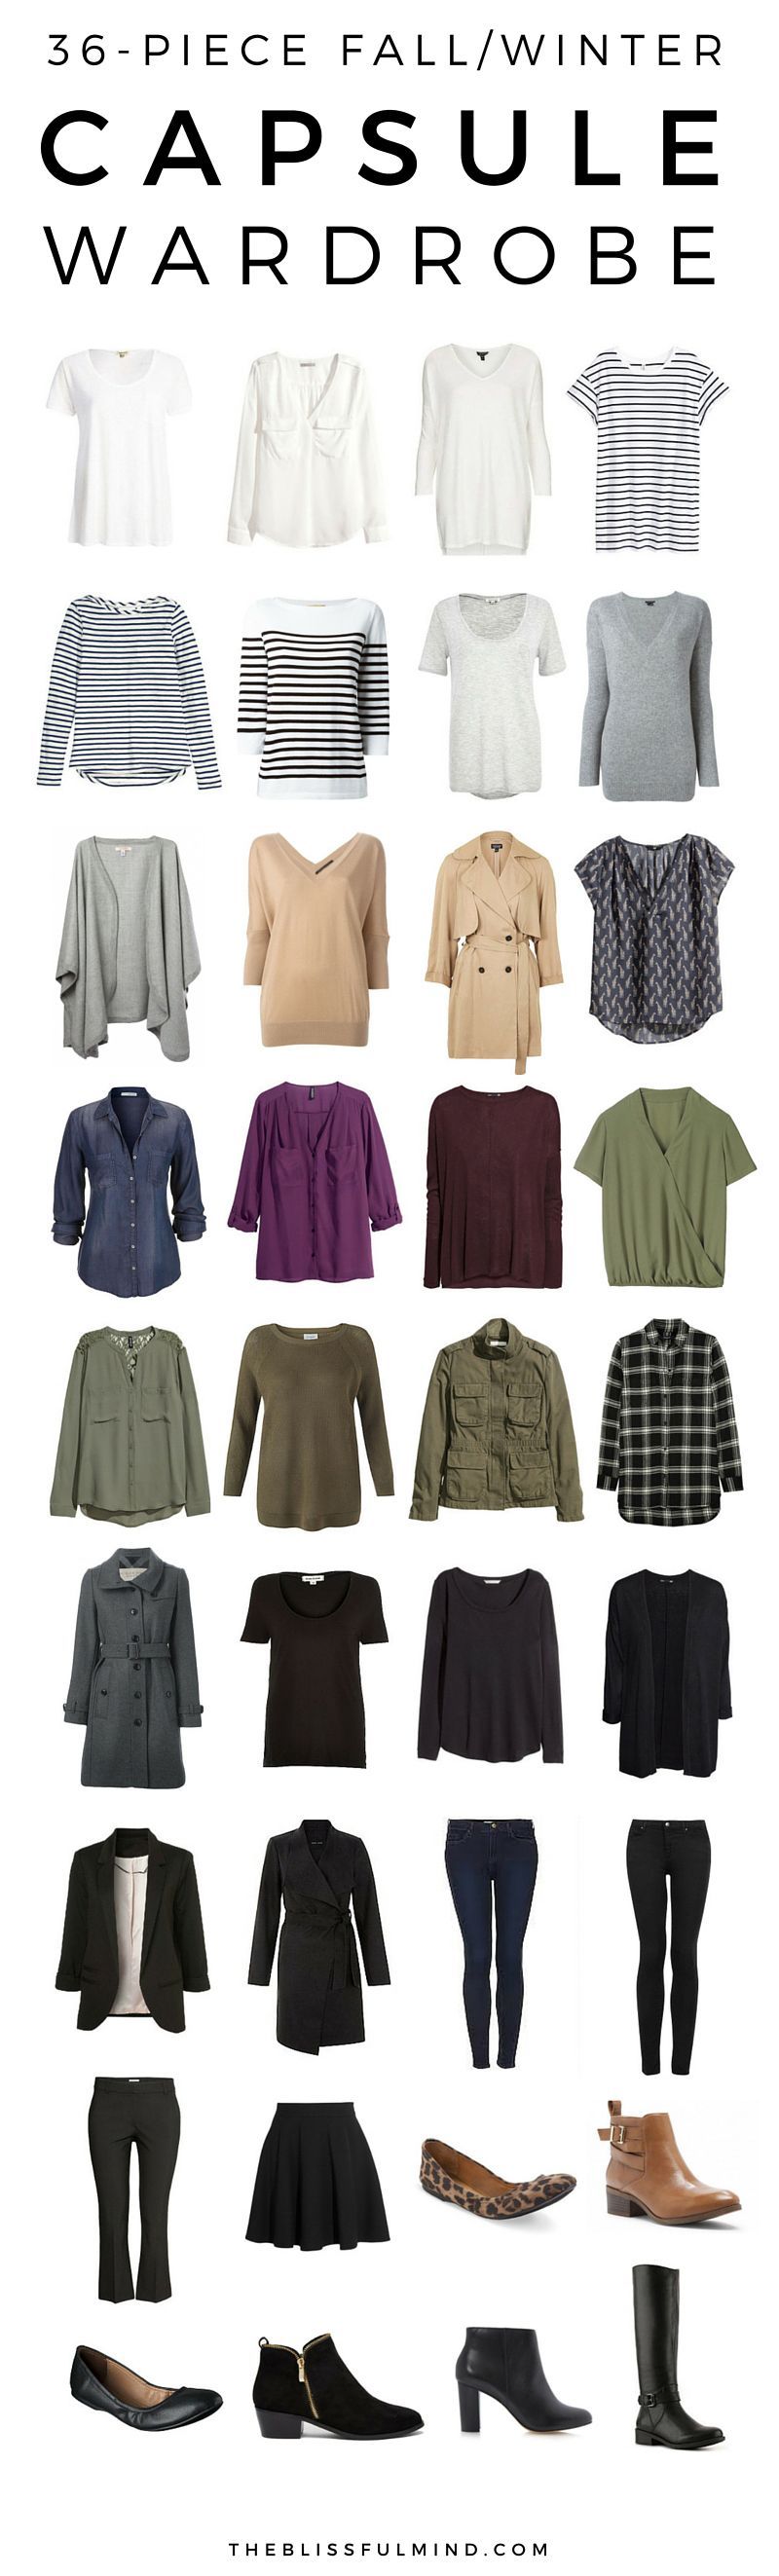 A 36-piece fall winter capsule wardrobe + 5 outfit ideas- click through to find out where to buy the items pictured!